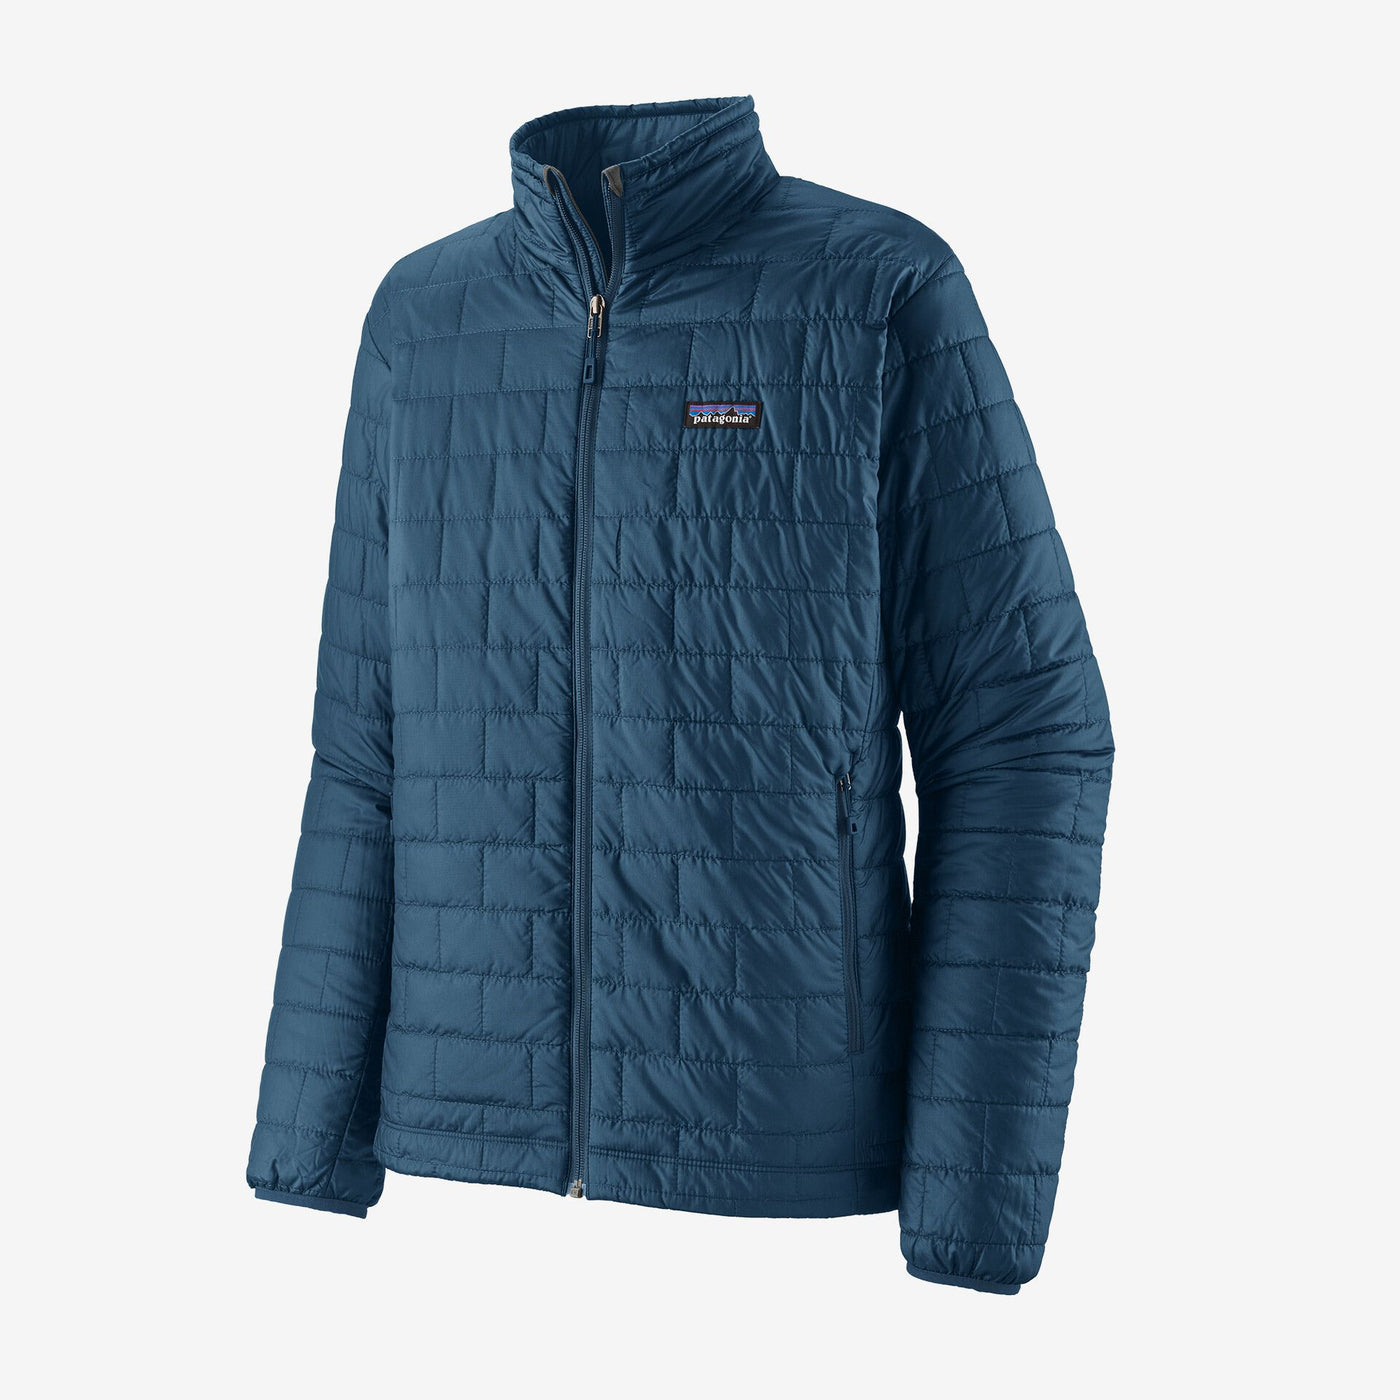 Patagonia Men's Nano Puff Jacket-Men's Clothing-Lagom Blue-S-Kevin's Fine Outdoor Gear & Apparel